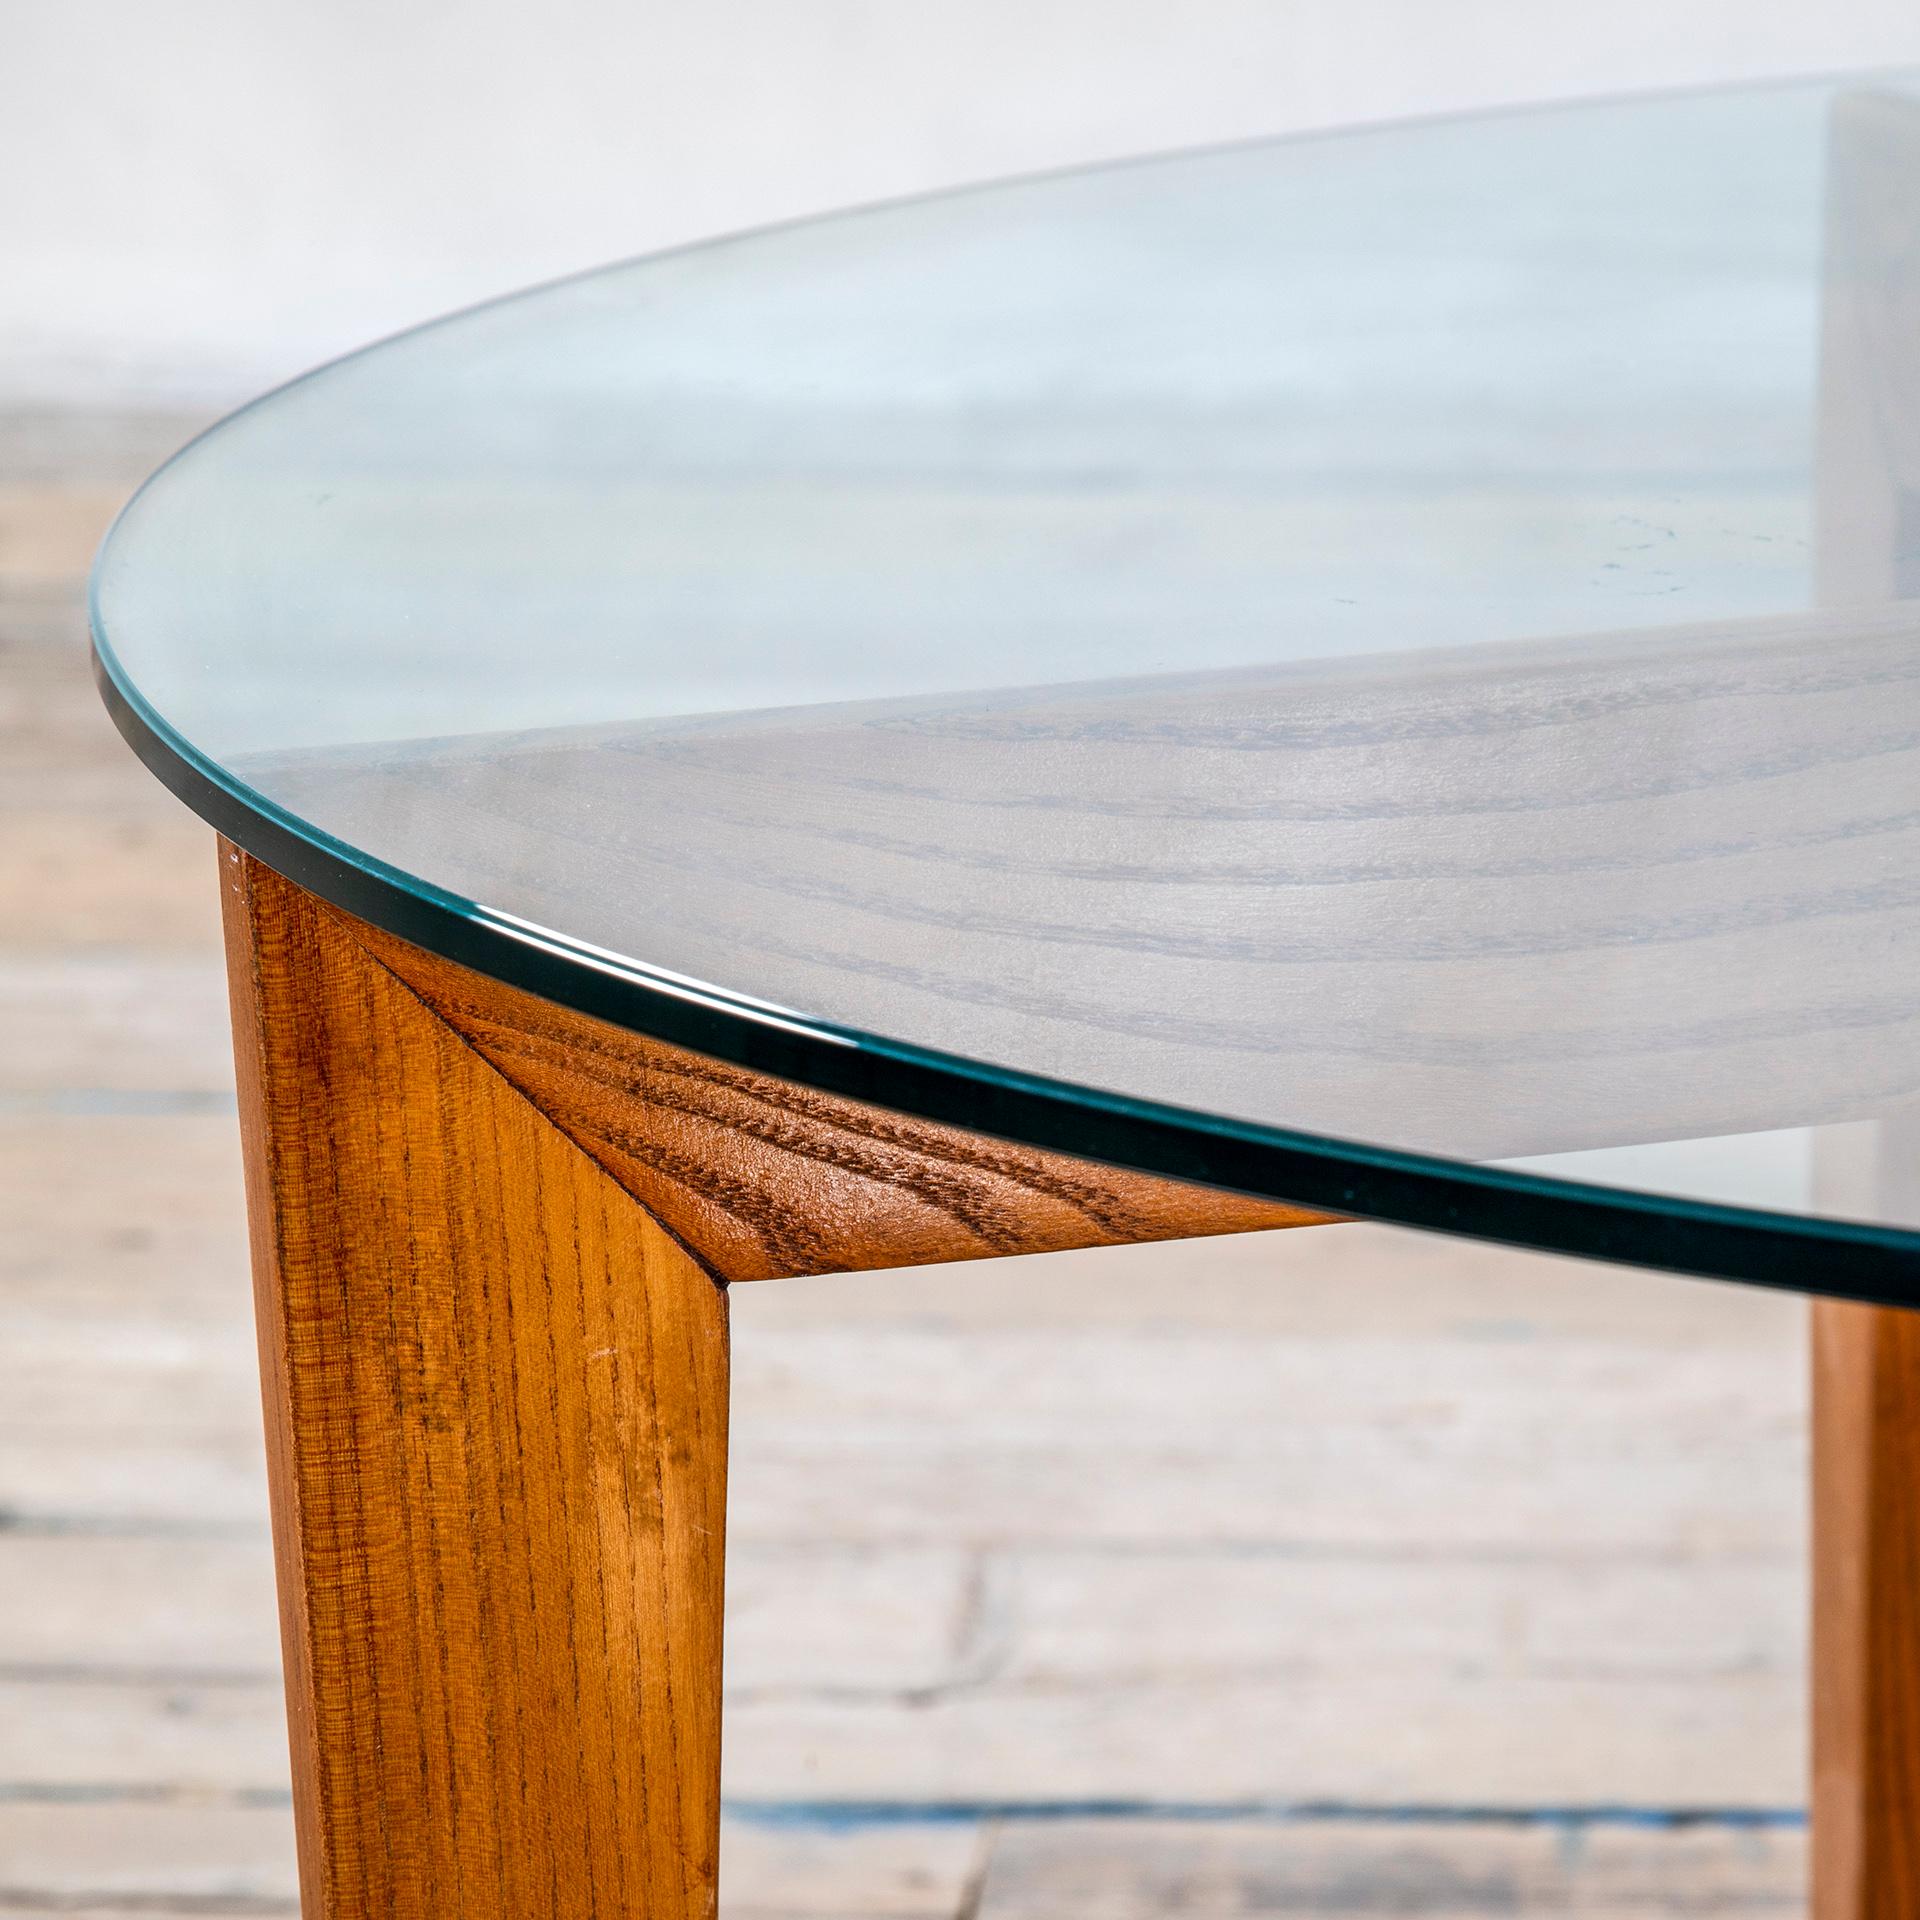 Italian 20th Century Gio Ponti Coffee Table for Isa Bergamo in Wood with Round Glass Top For Sale